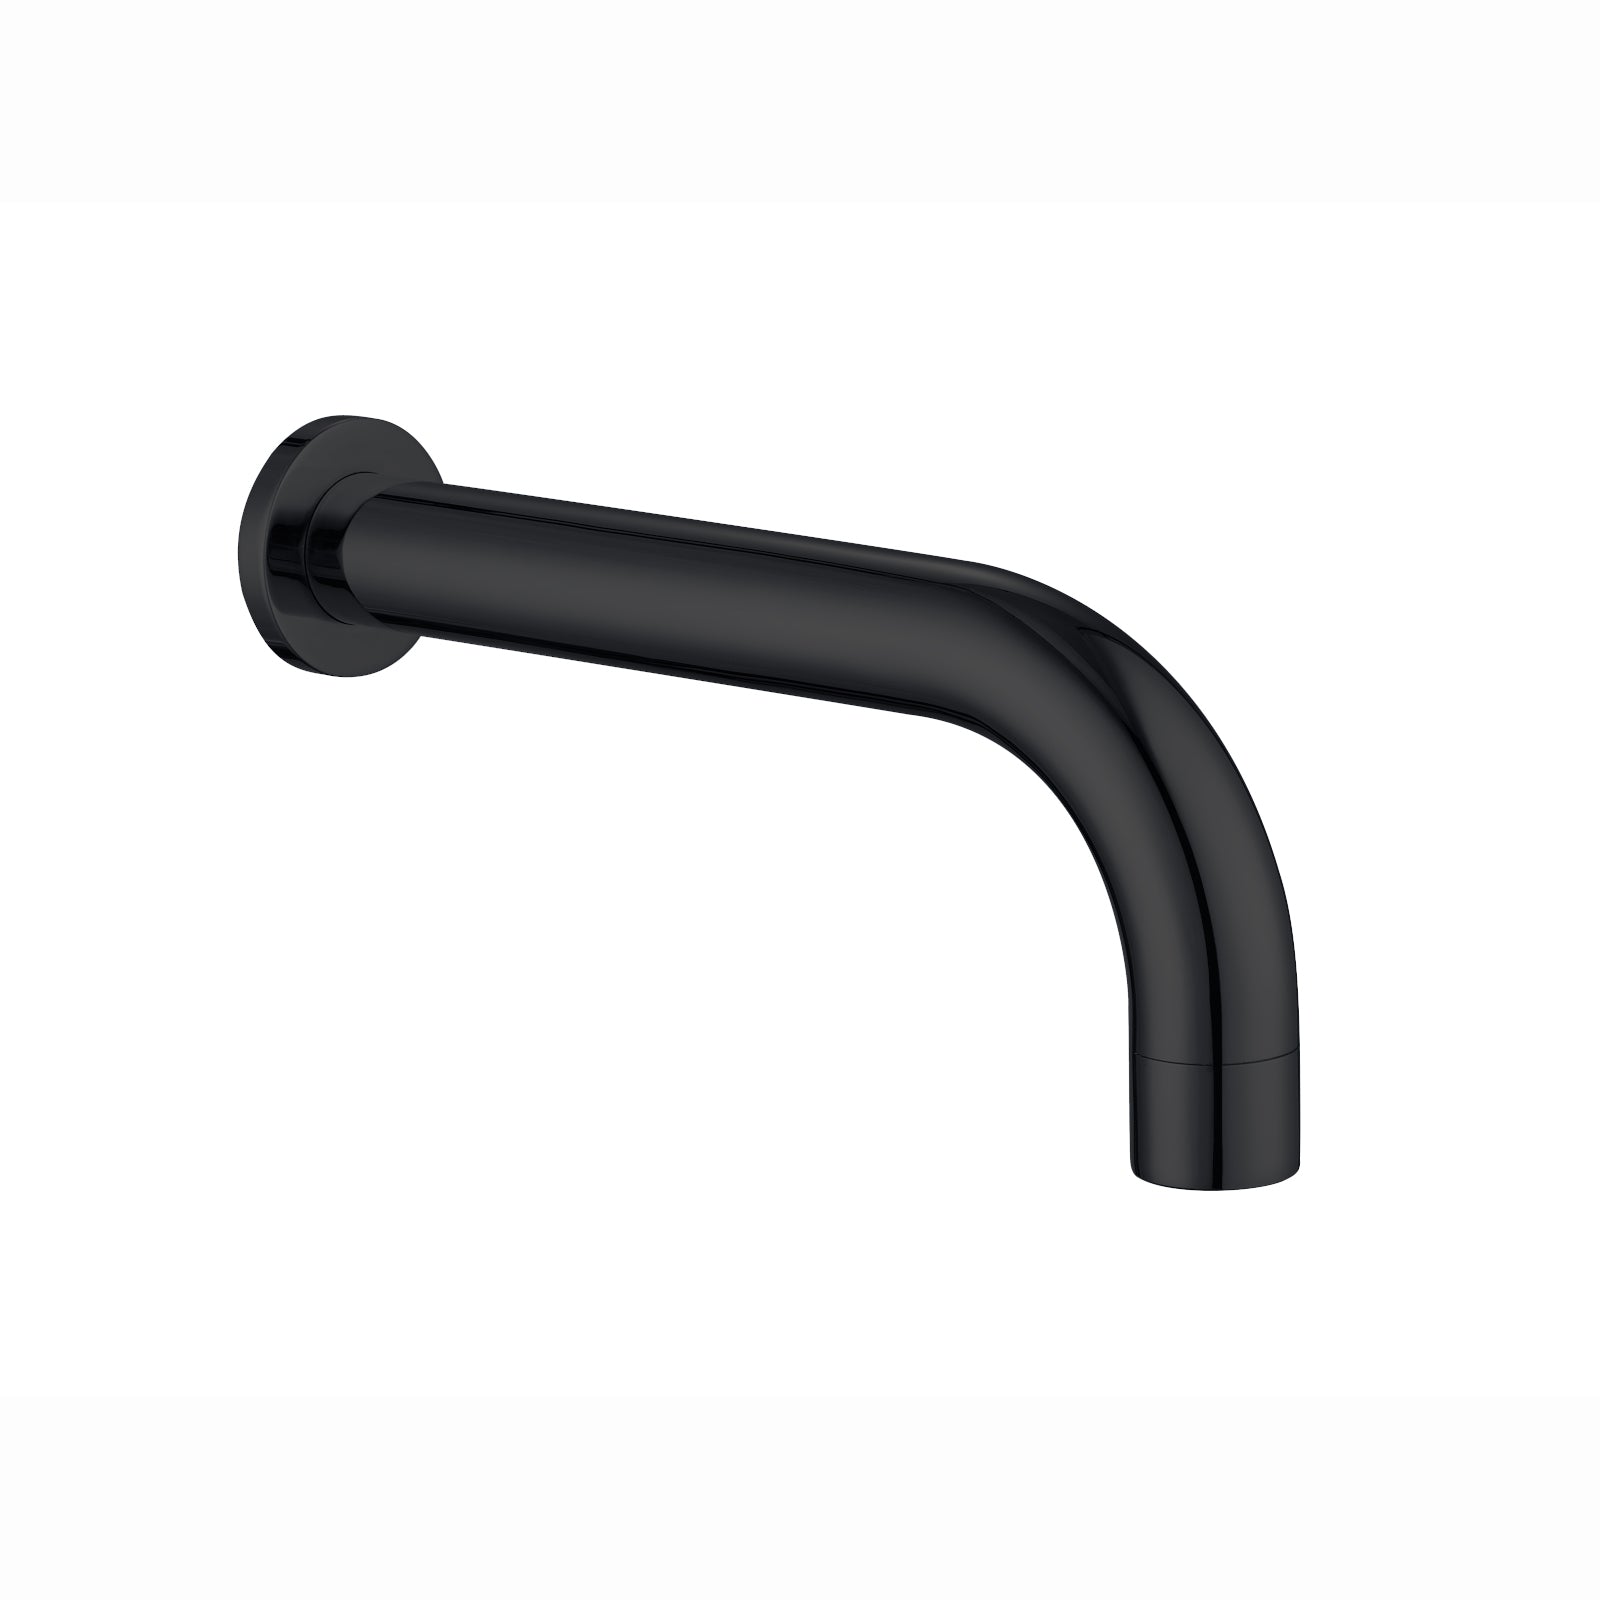 Round bath or basin spout wall mounted - matte black - Showers